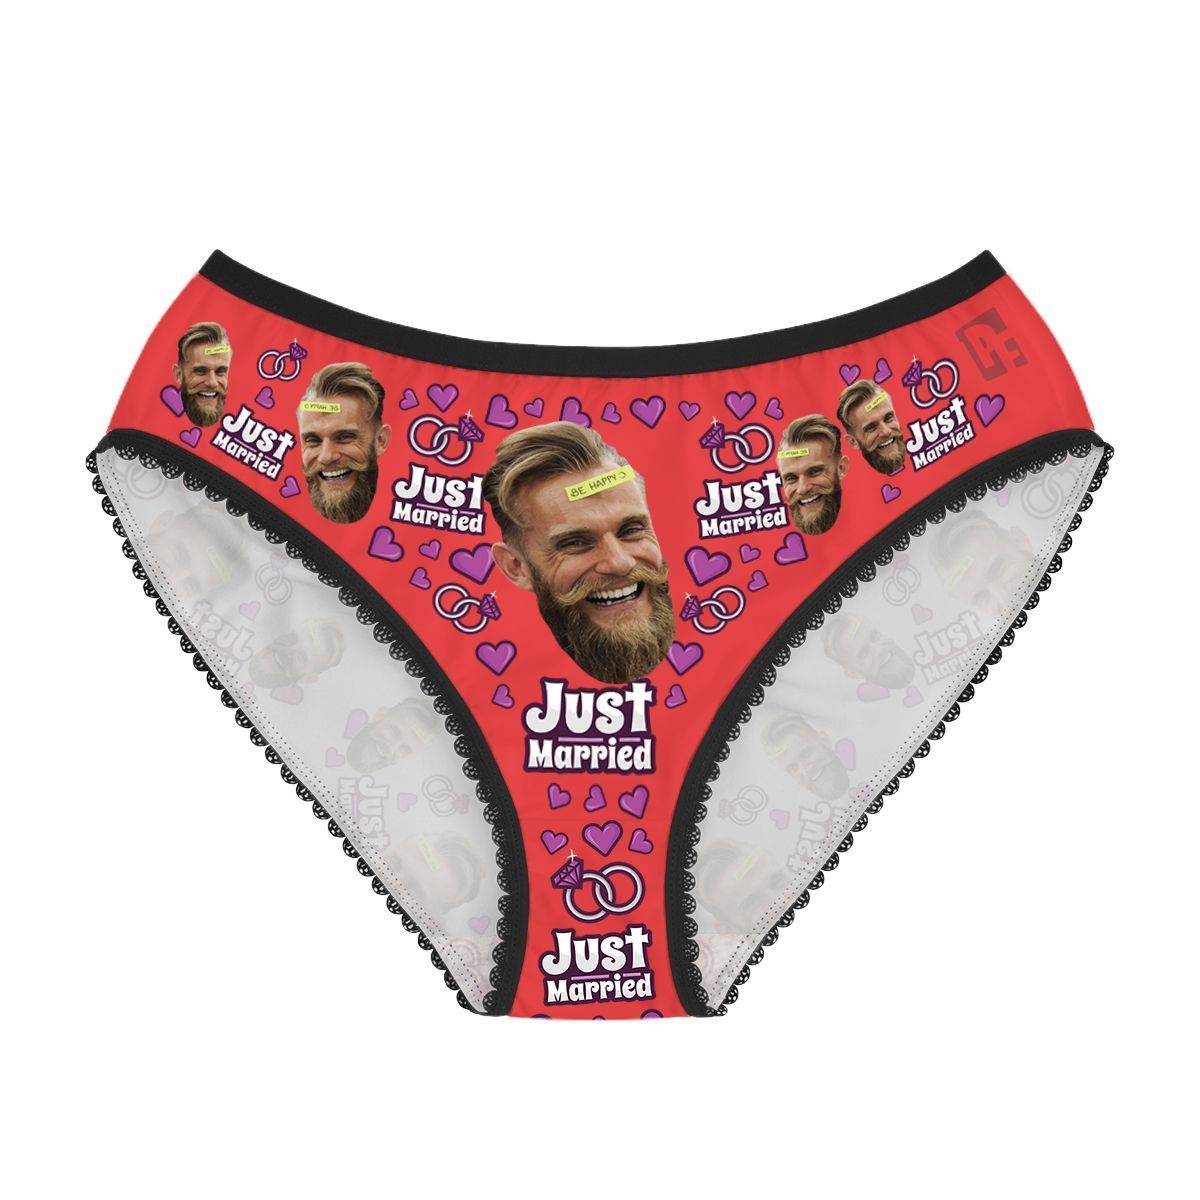 Mint Just married women's underwear briefs personalized with photo printed on them